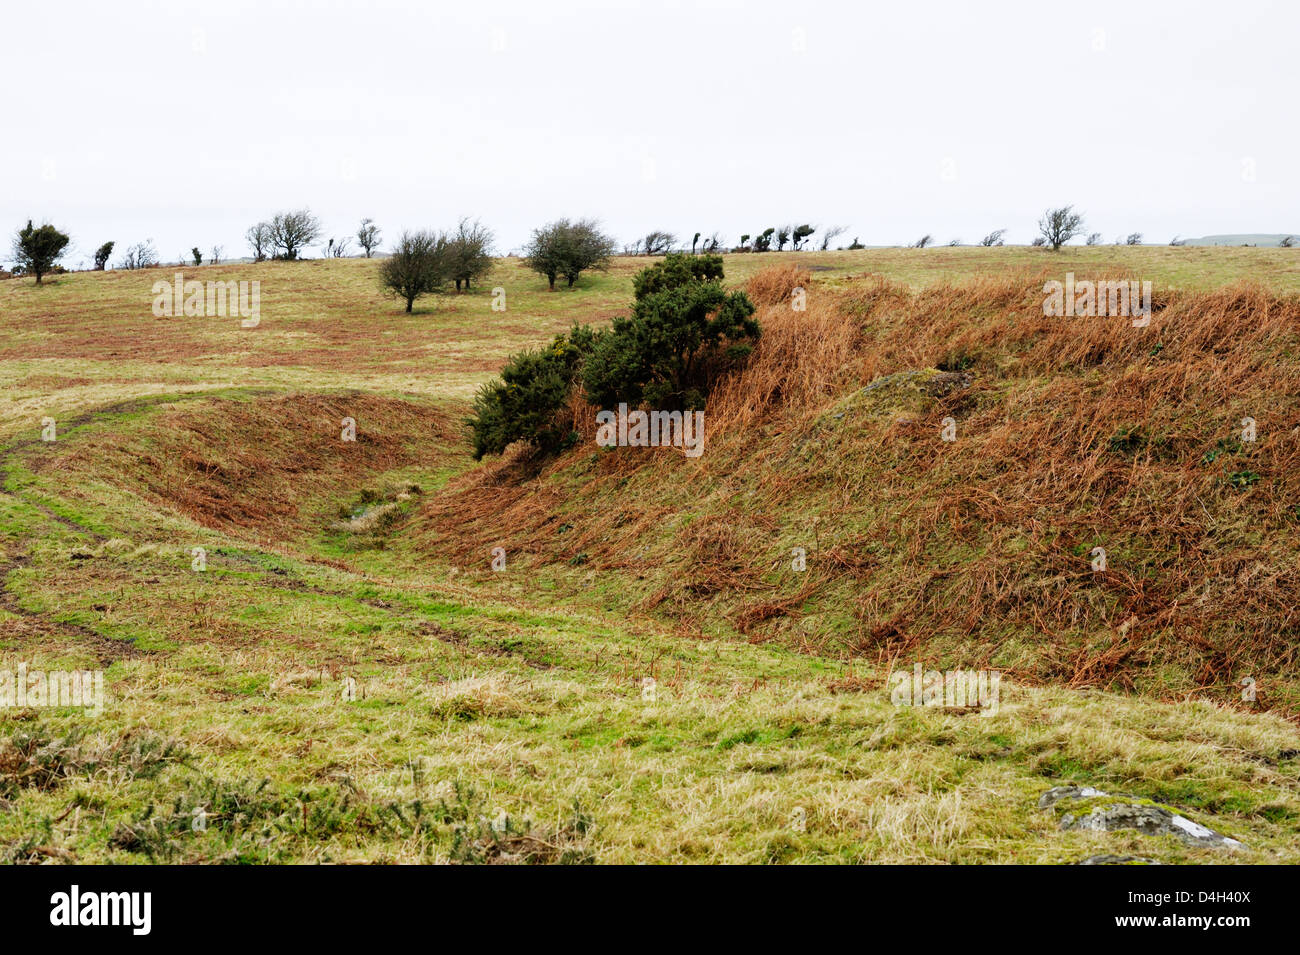 Bank and ditch of a Norman motte and bailey, built within an Iron Age hill fort, Caer Penrhos, Llanrhystud, Wales Stock Photo